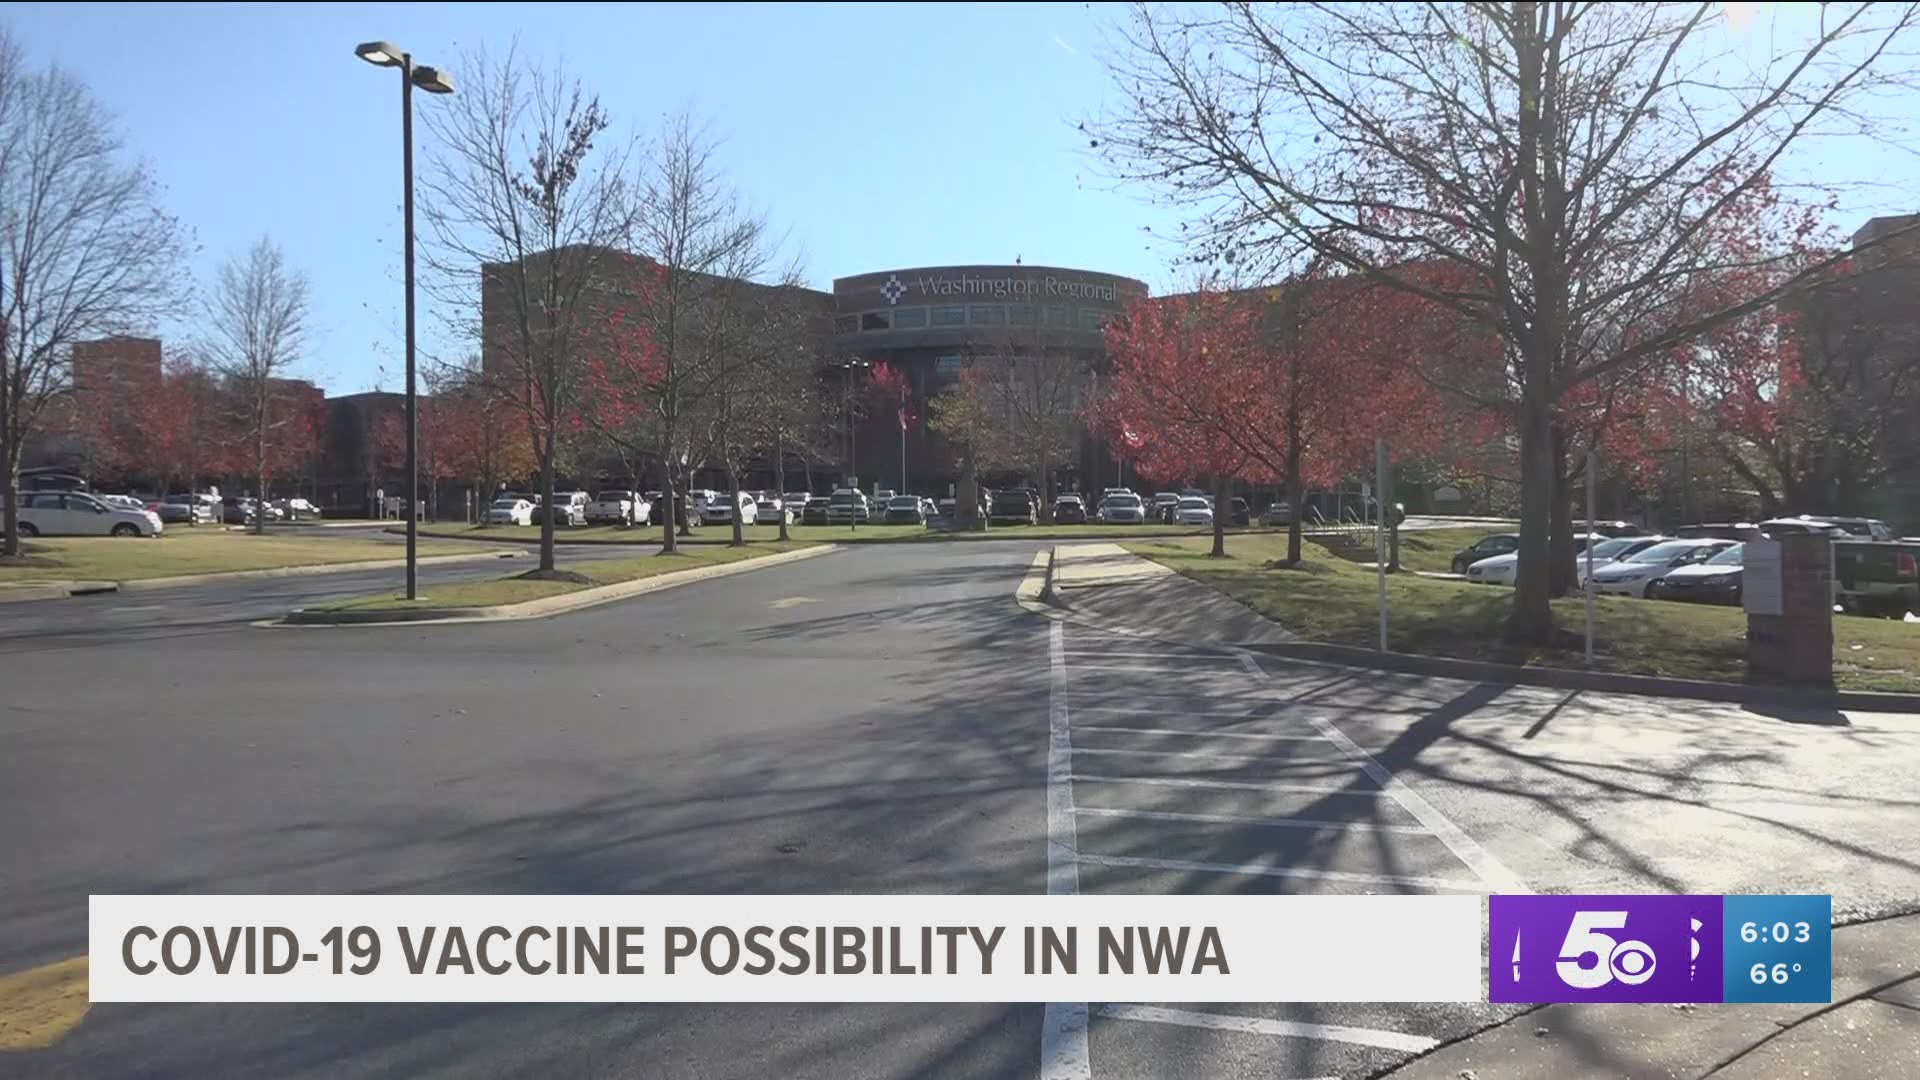 A COVID-19 vaccine could possibly be coming to Washington Regional